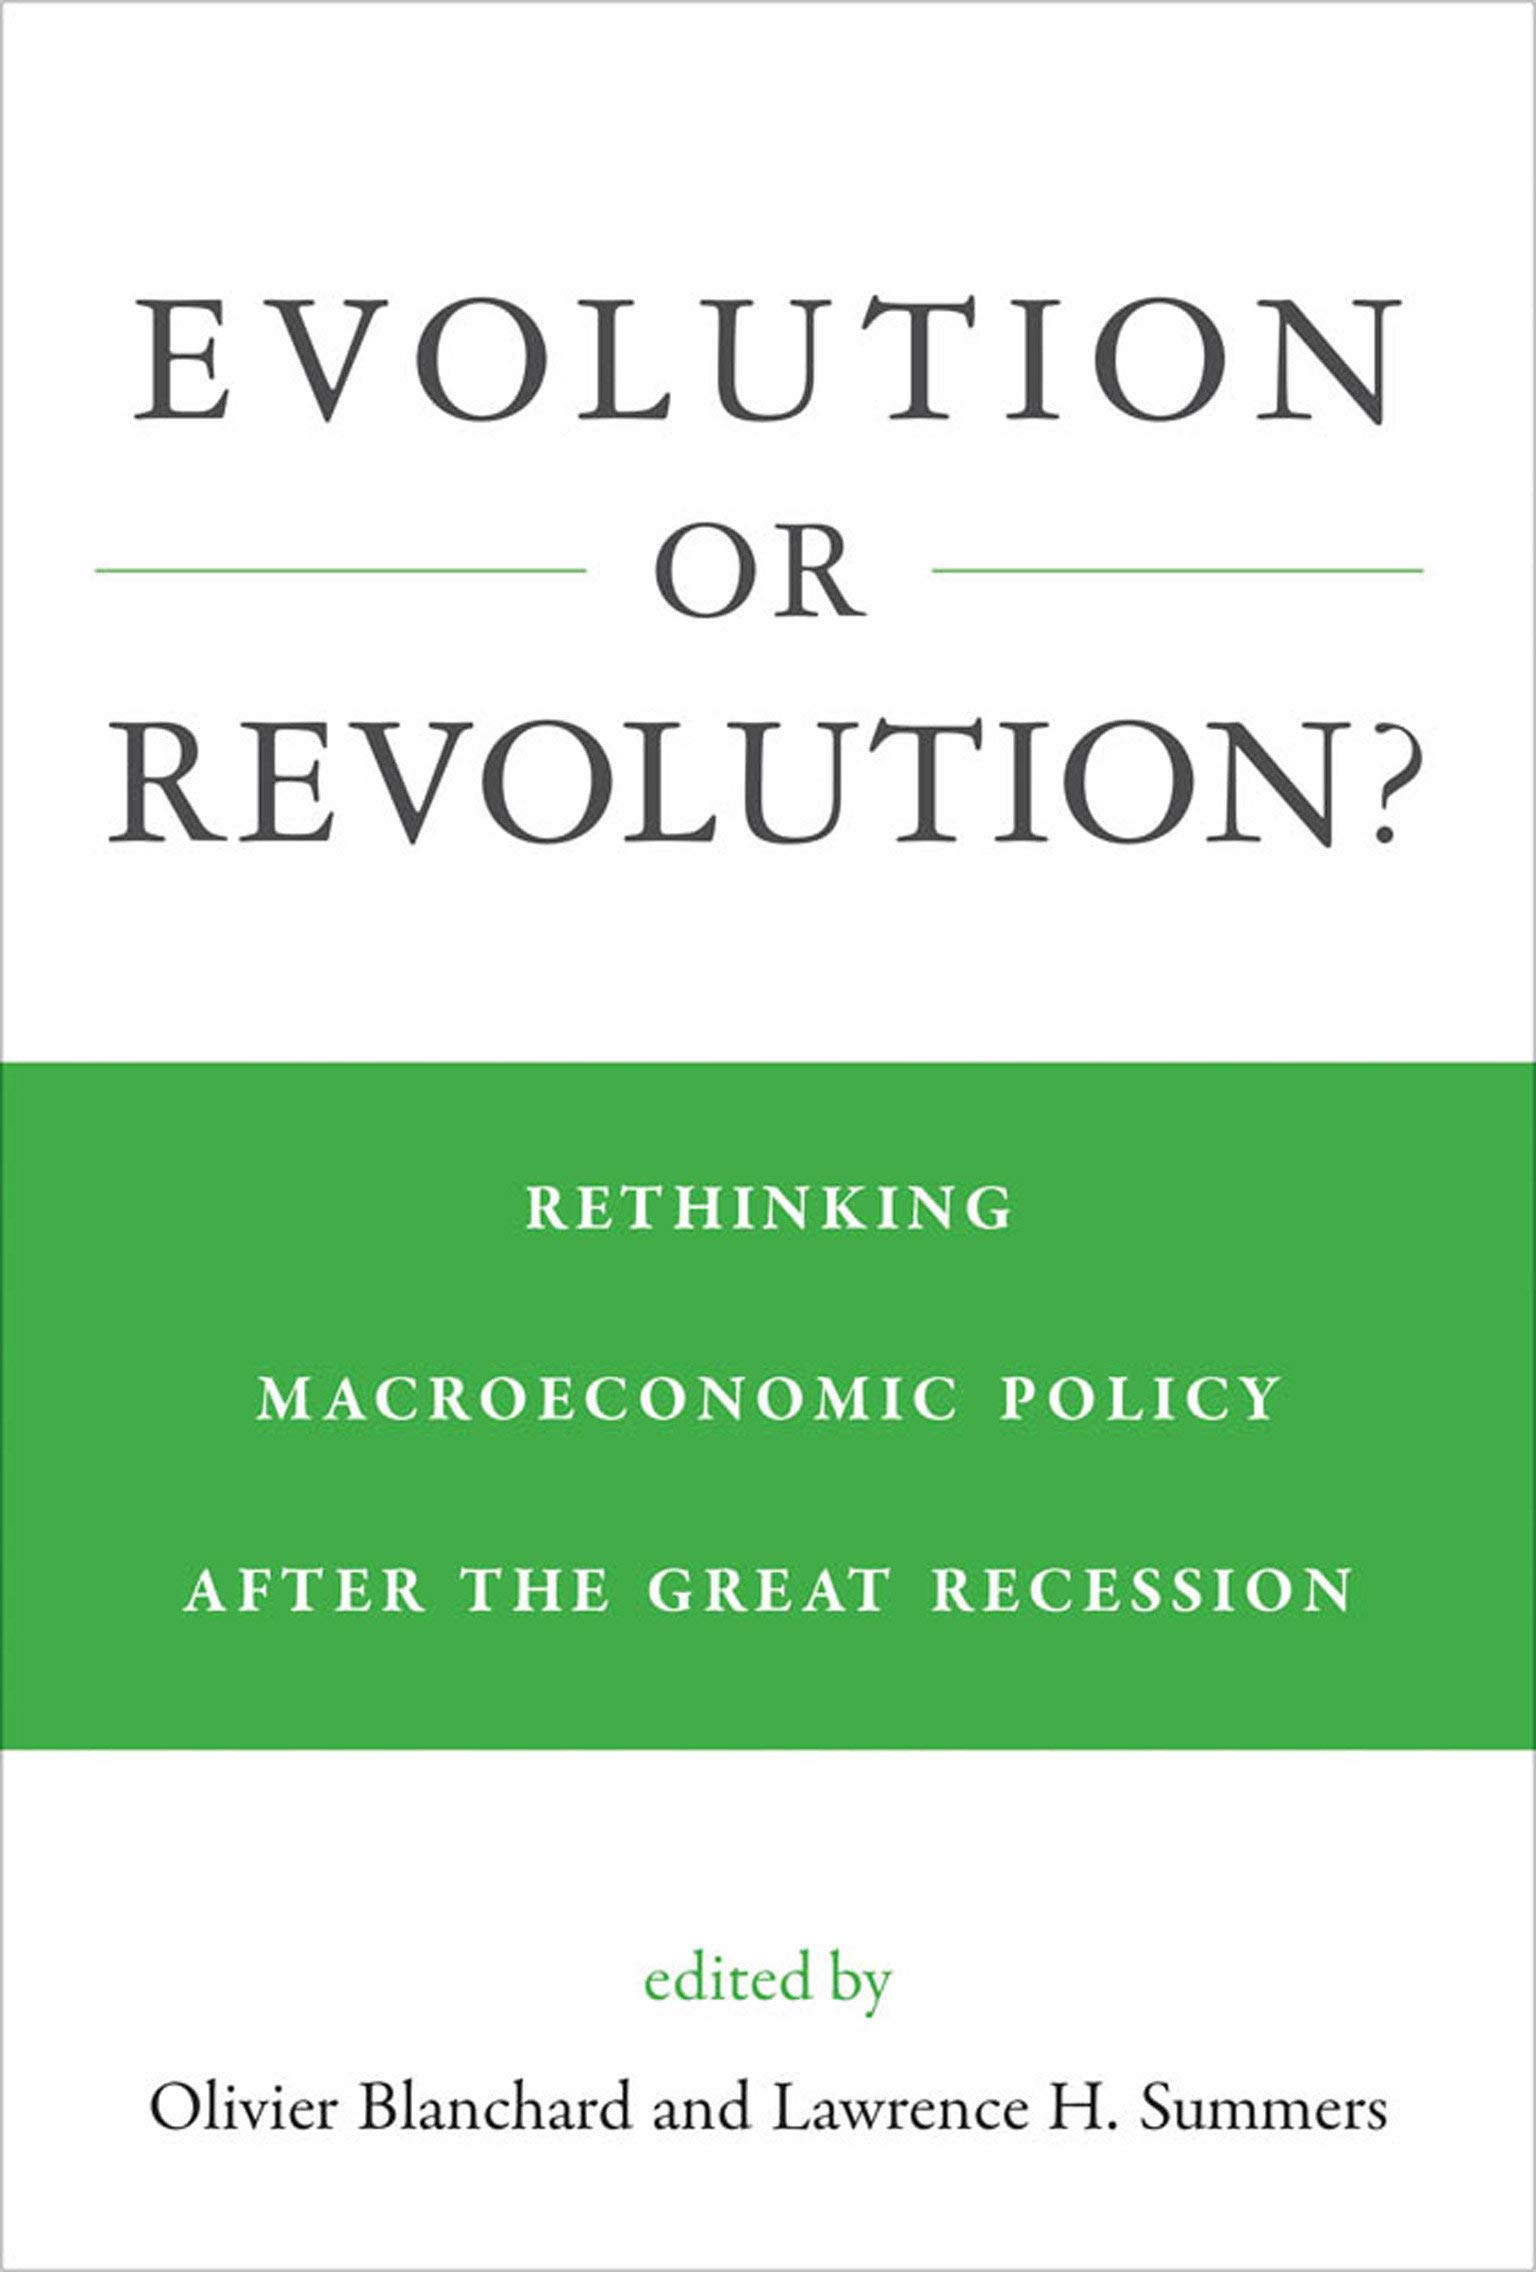 Evolution or Revolution?: Rethinking Macroeconomic Policy after the Great Recession (The MIT Press)